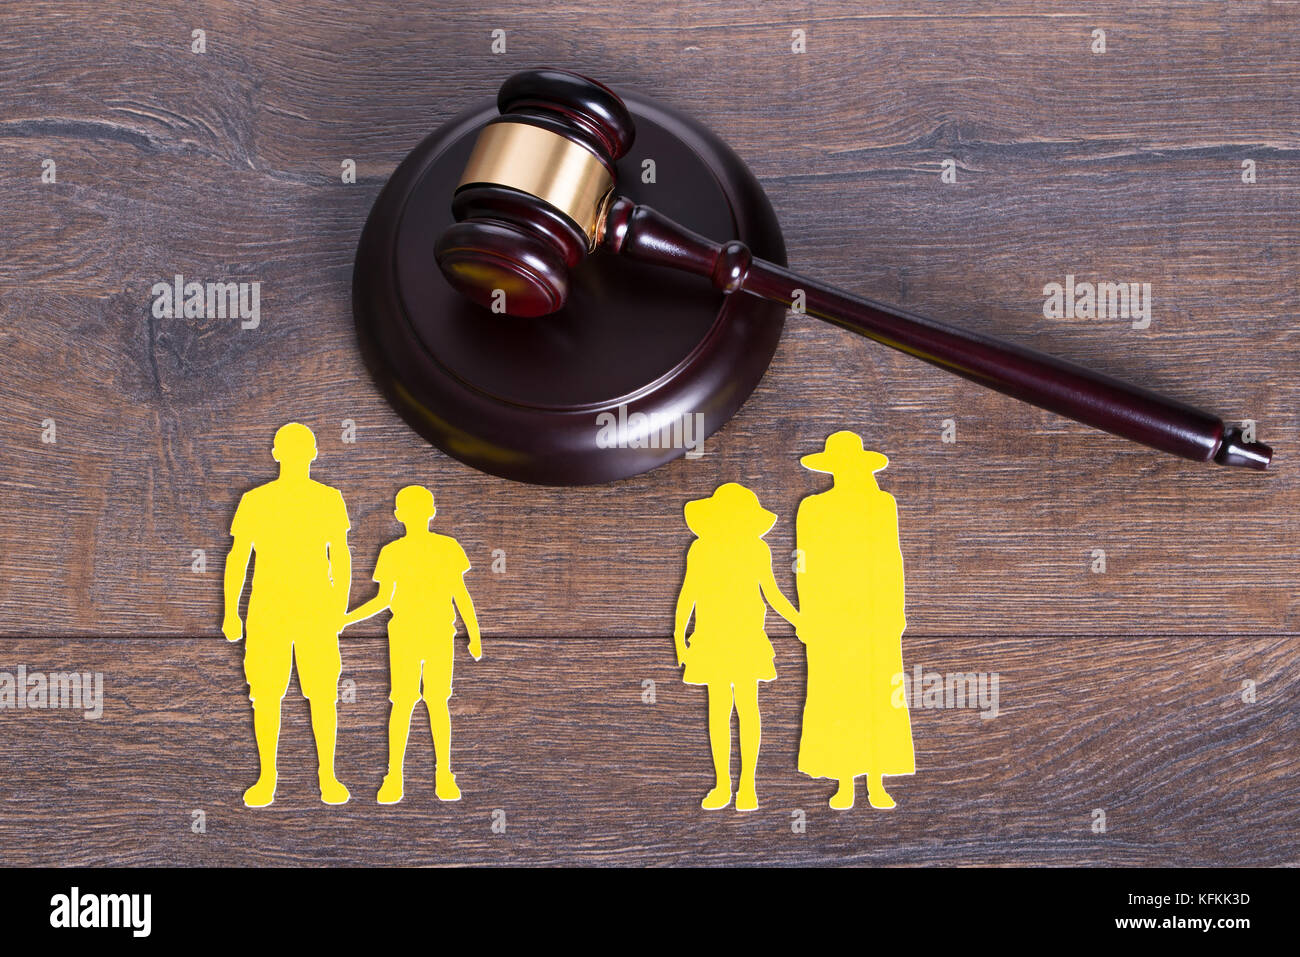 Gavel on the table and paper family representing divorce Stock Photo